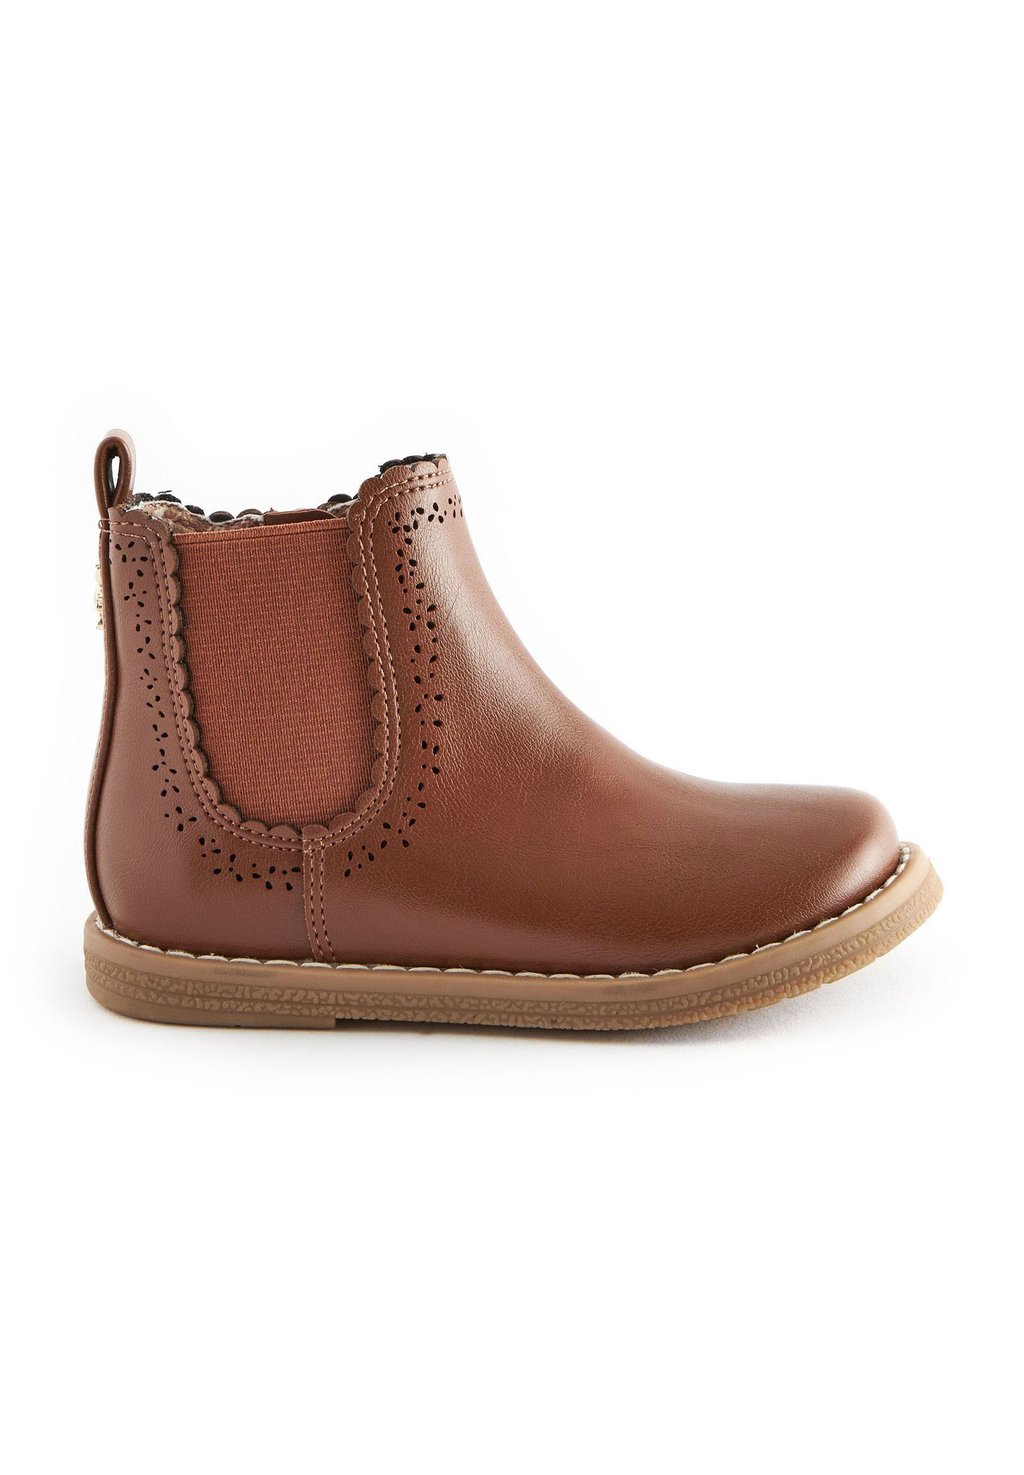 Туфли First Steps Chelsea Wide Fit G Next, цвет tan brown